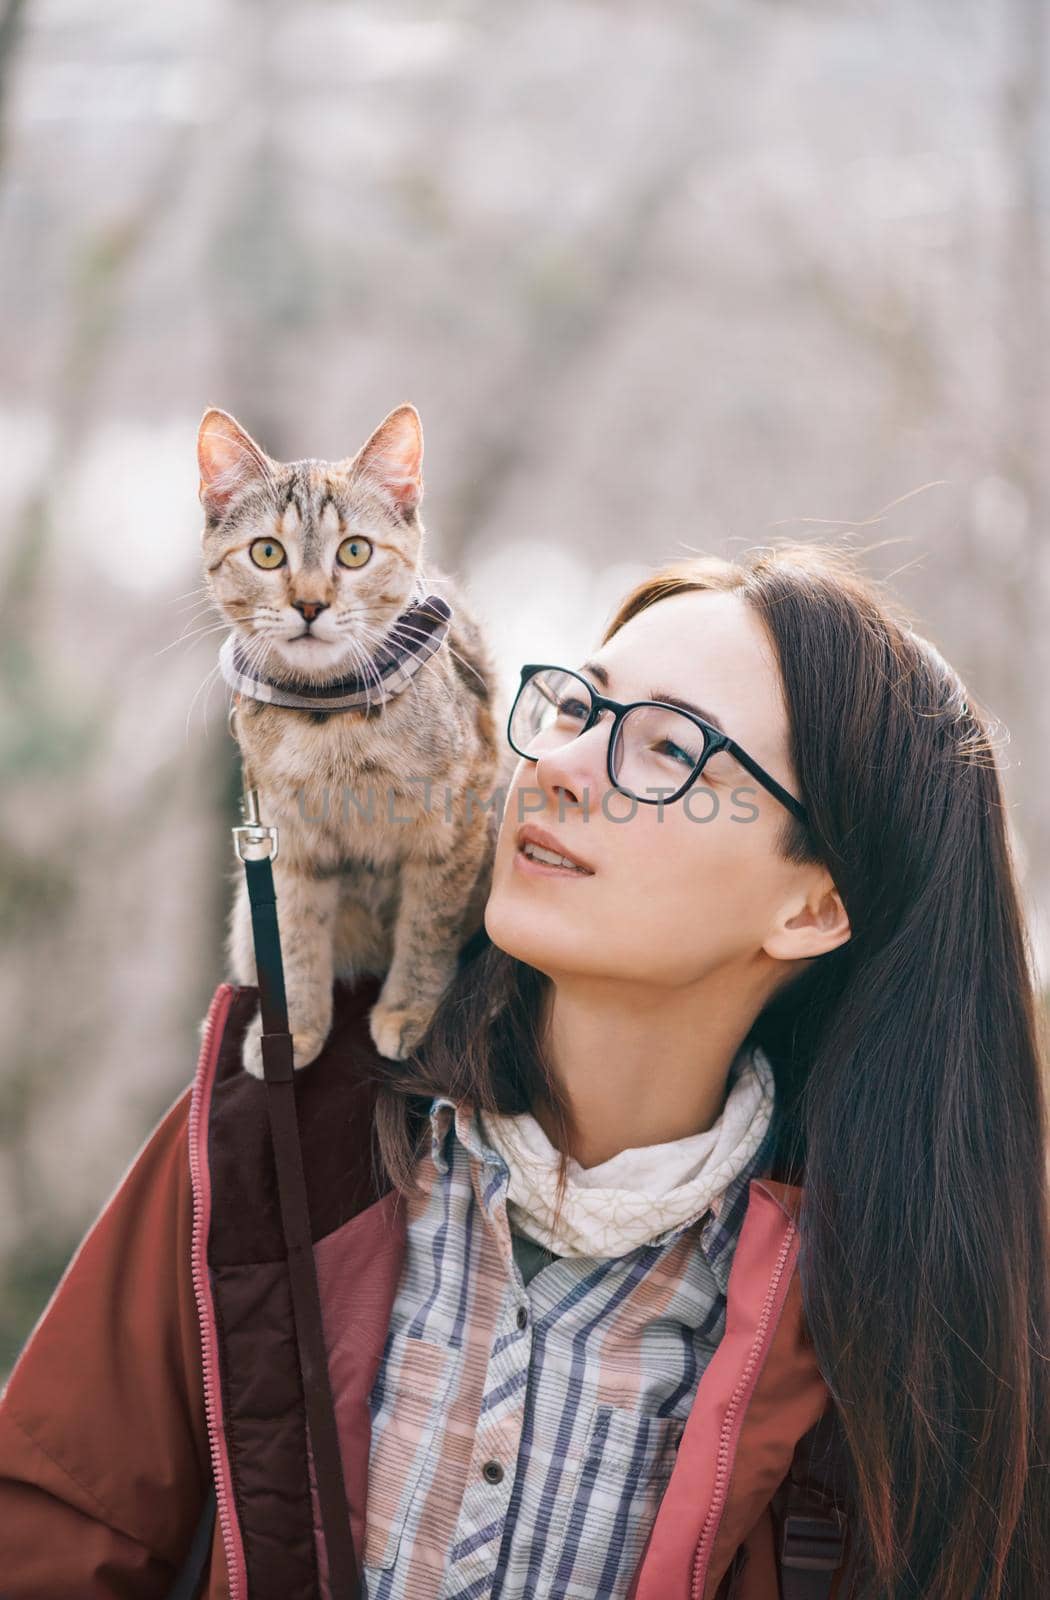 Traveler cat and woman outdoor. by alexAleksei